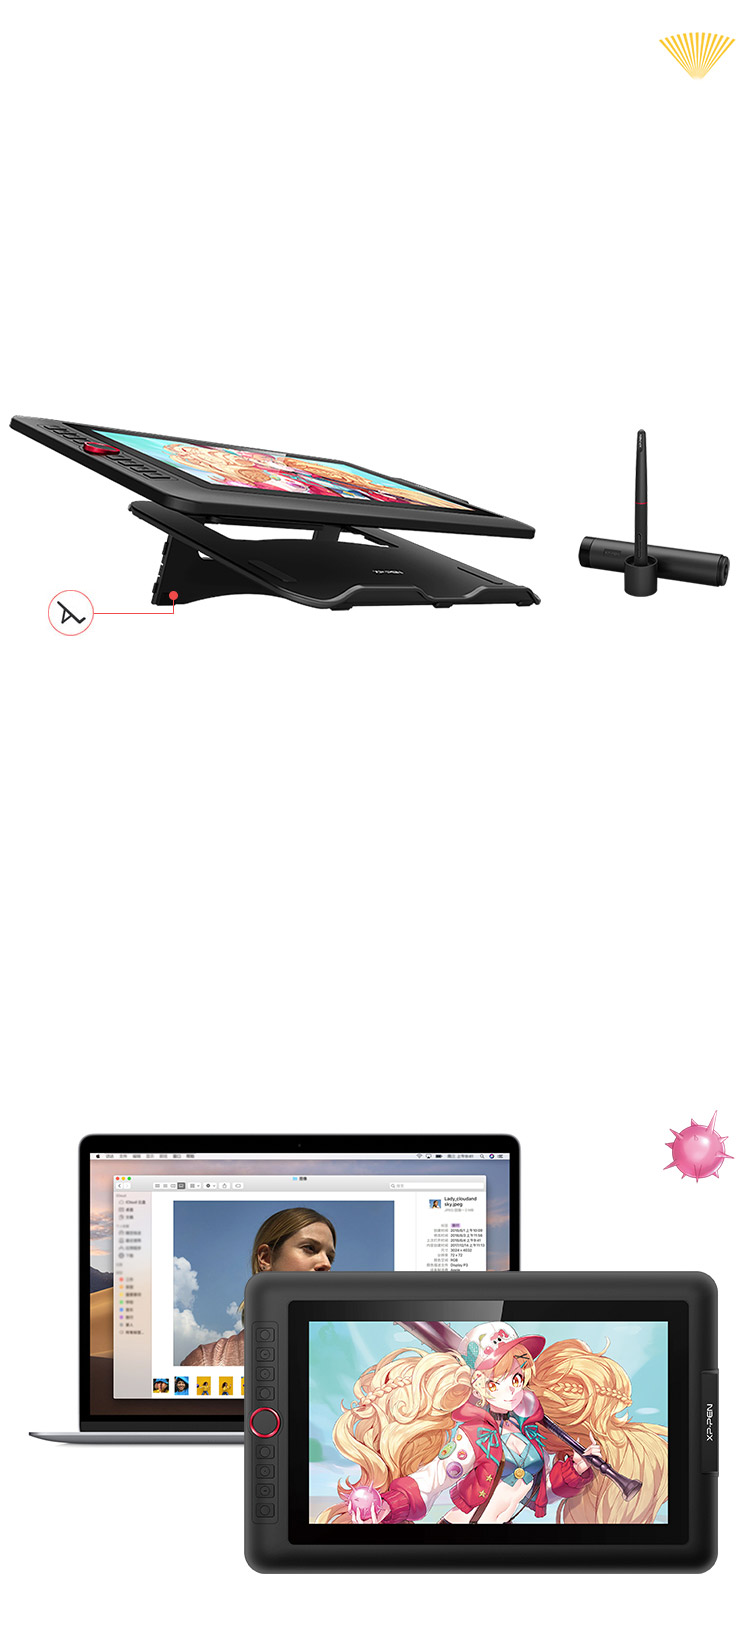 XP-Pen Artist 13.3 Pro drawing tablet screen size 13.3 inch comparable to the laptop notebook